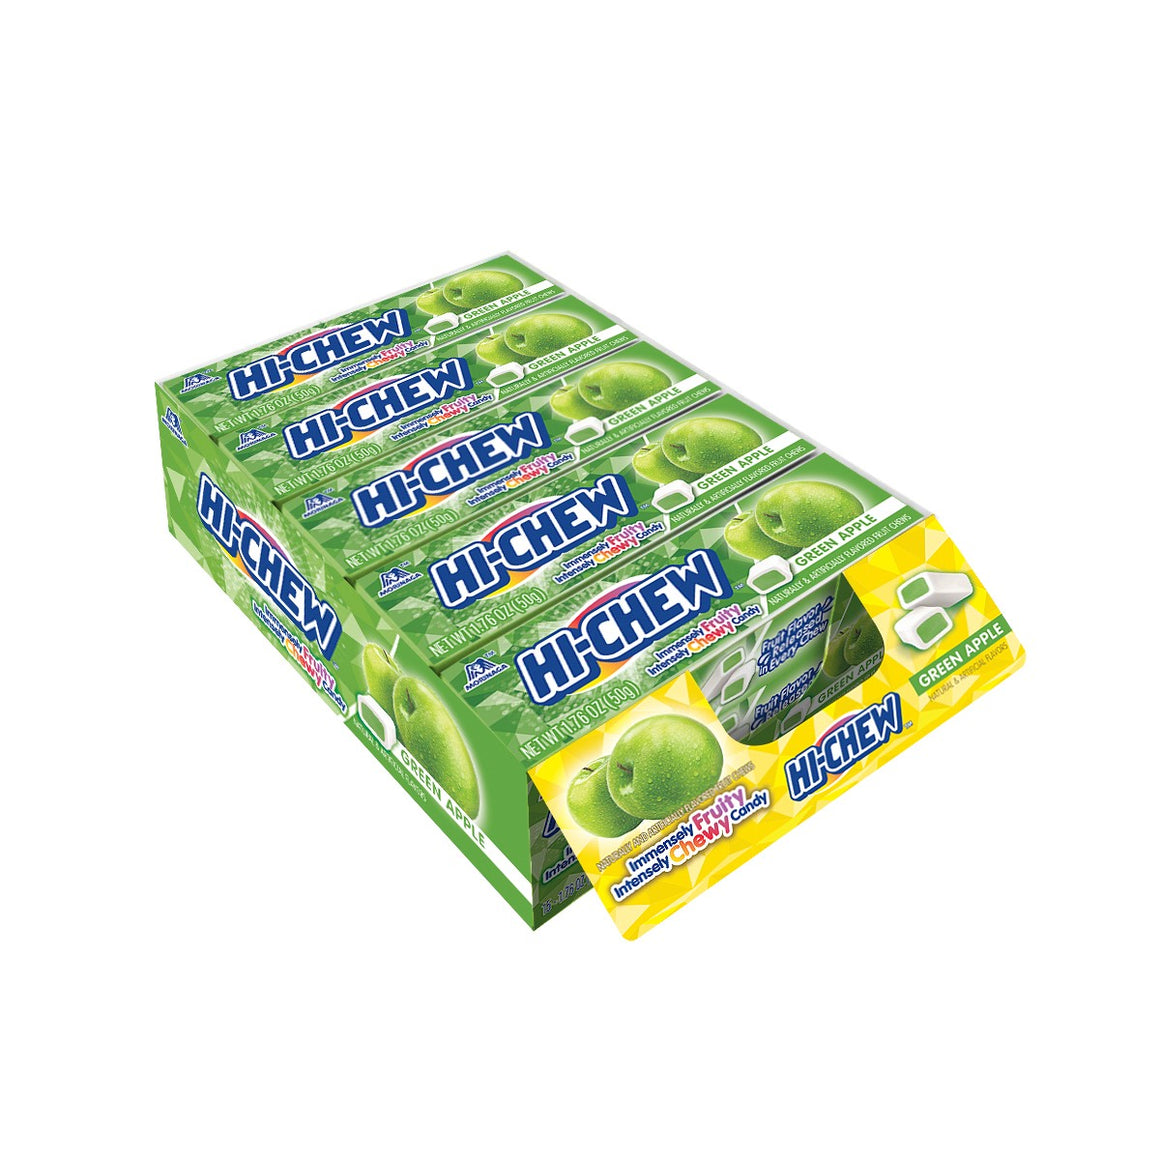 All City Candy Hi-Chew Green Apple Fruit Chews - 1.76-oz. Bar Chewy Morinaga & Company 1 Bar For fresh candy and great service, visit www.allcitycandy.com